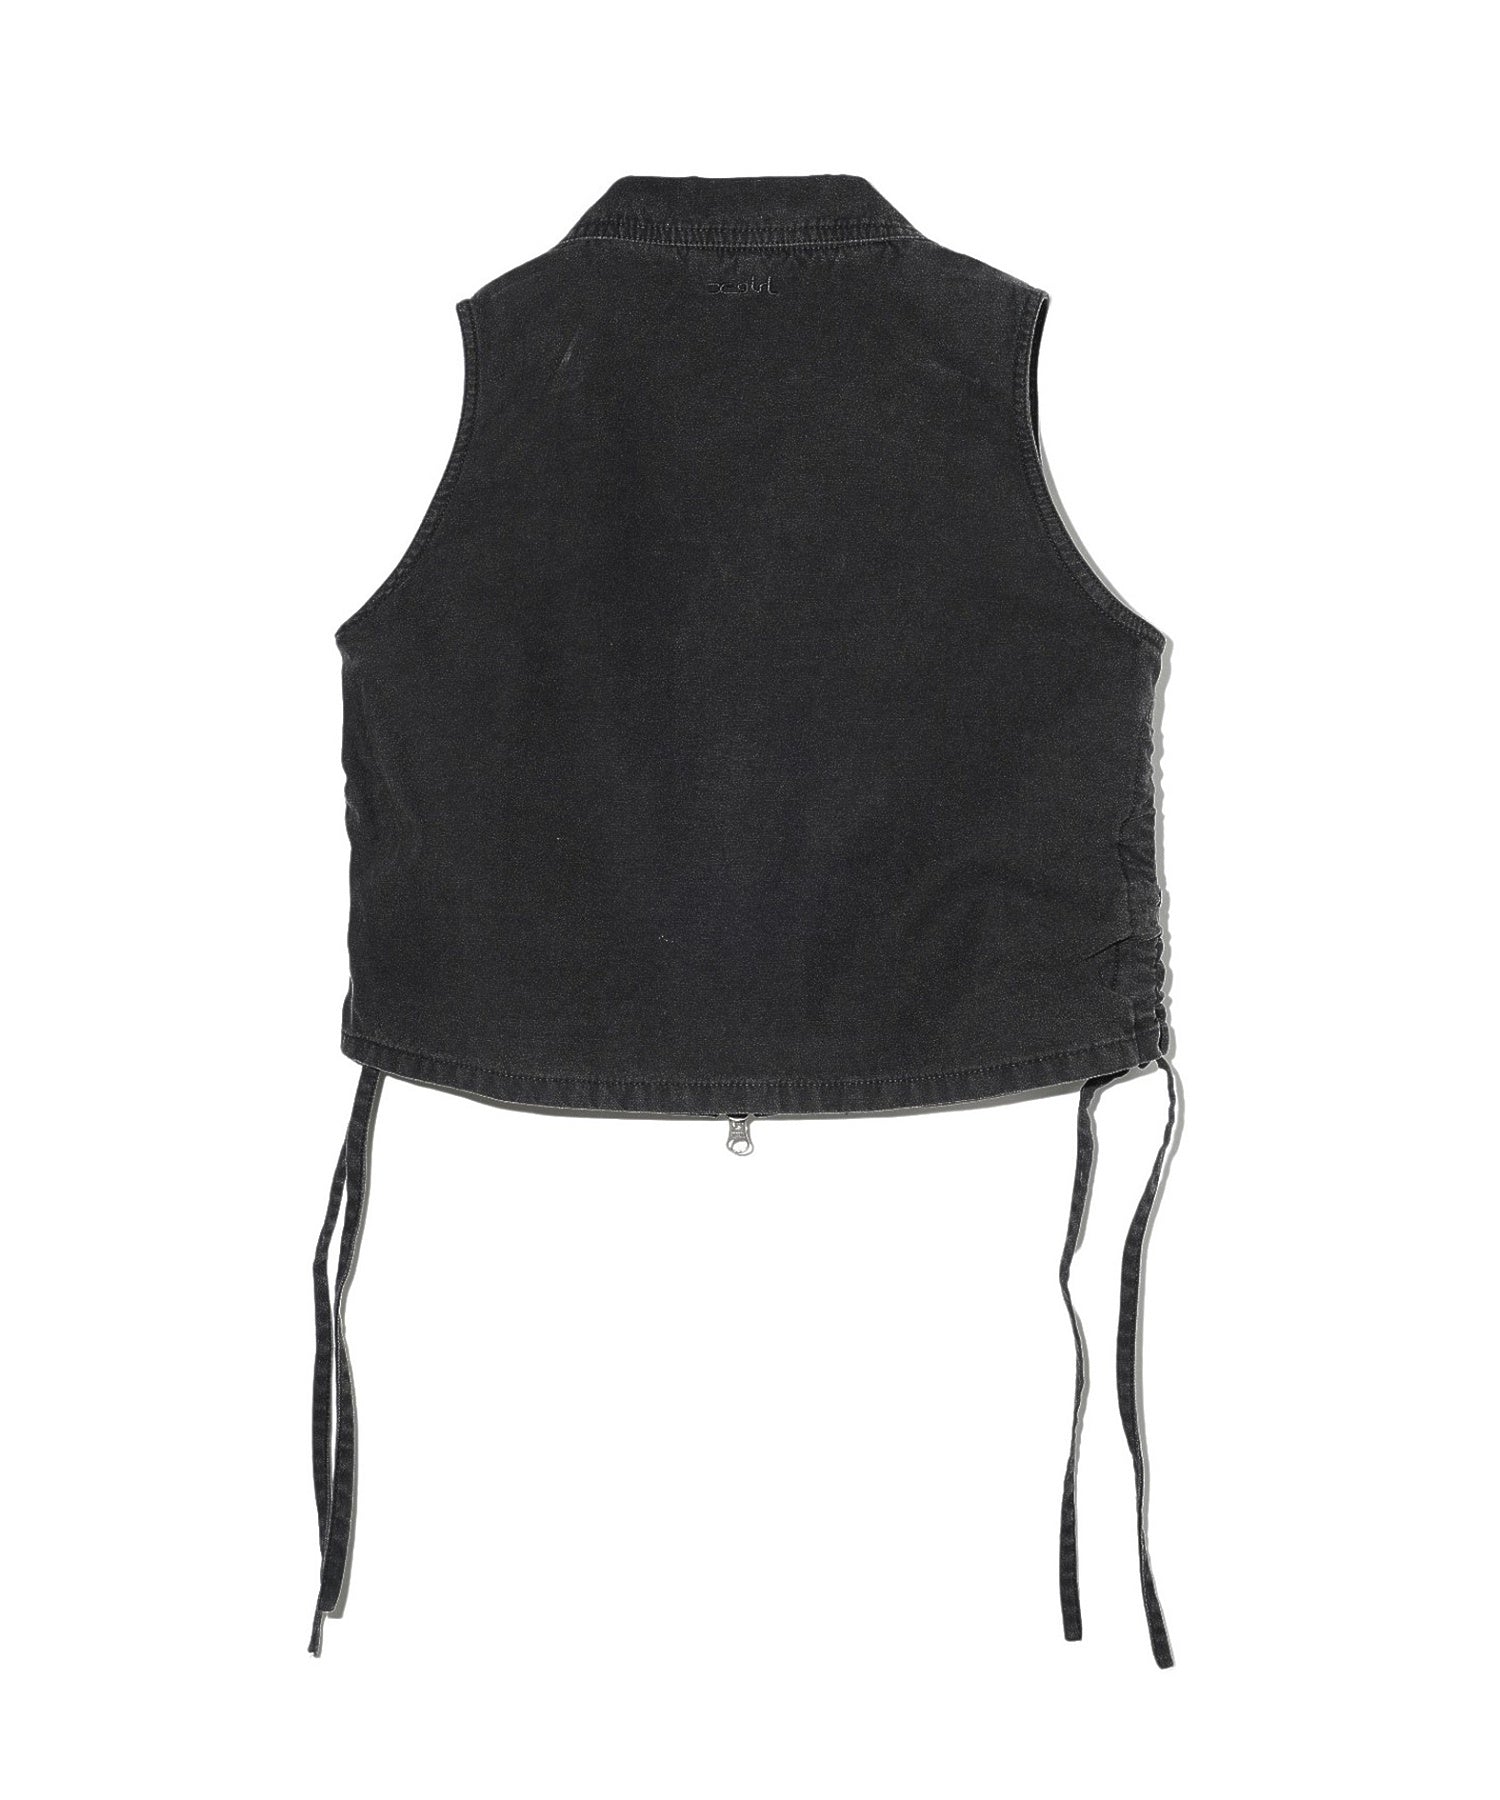 MILITARY COMPACT VEST